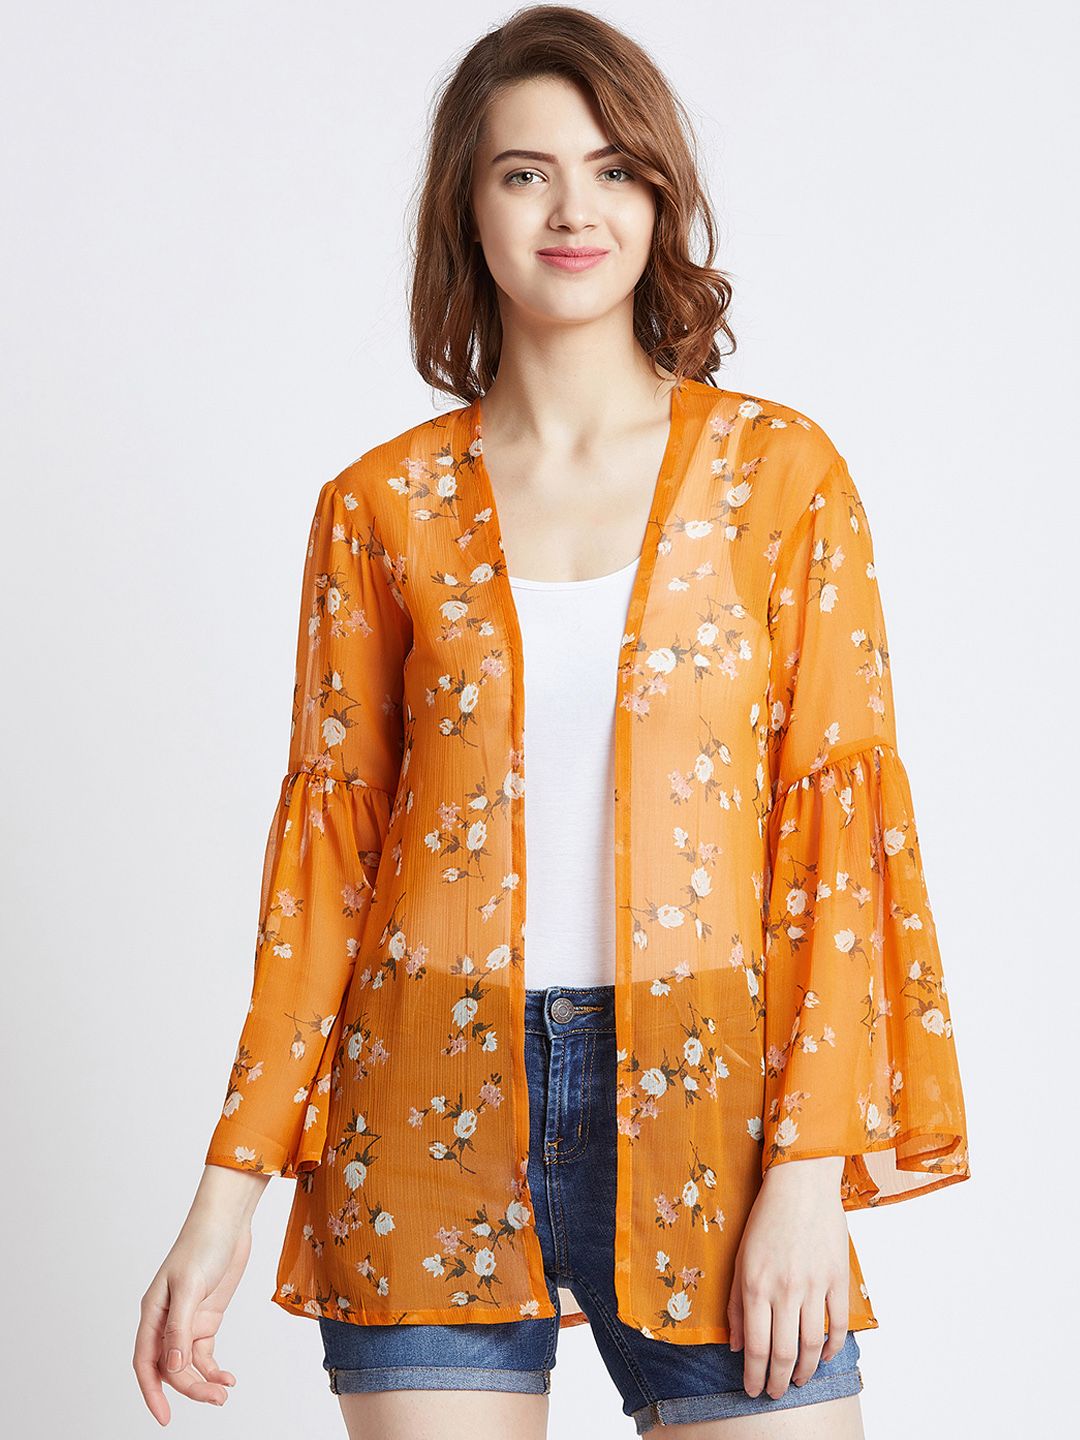 MAGRE Mustard Yellow Floral Printed Open Front Shrug Price in India